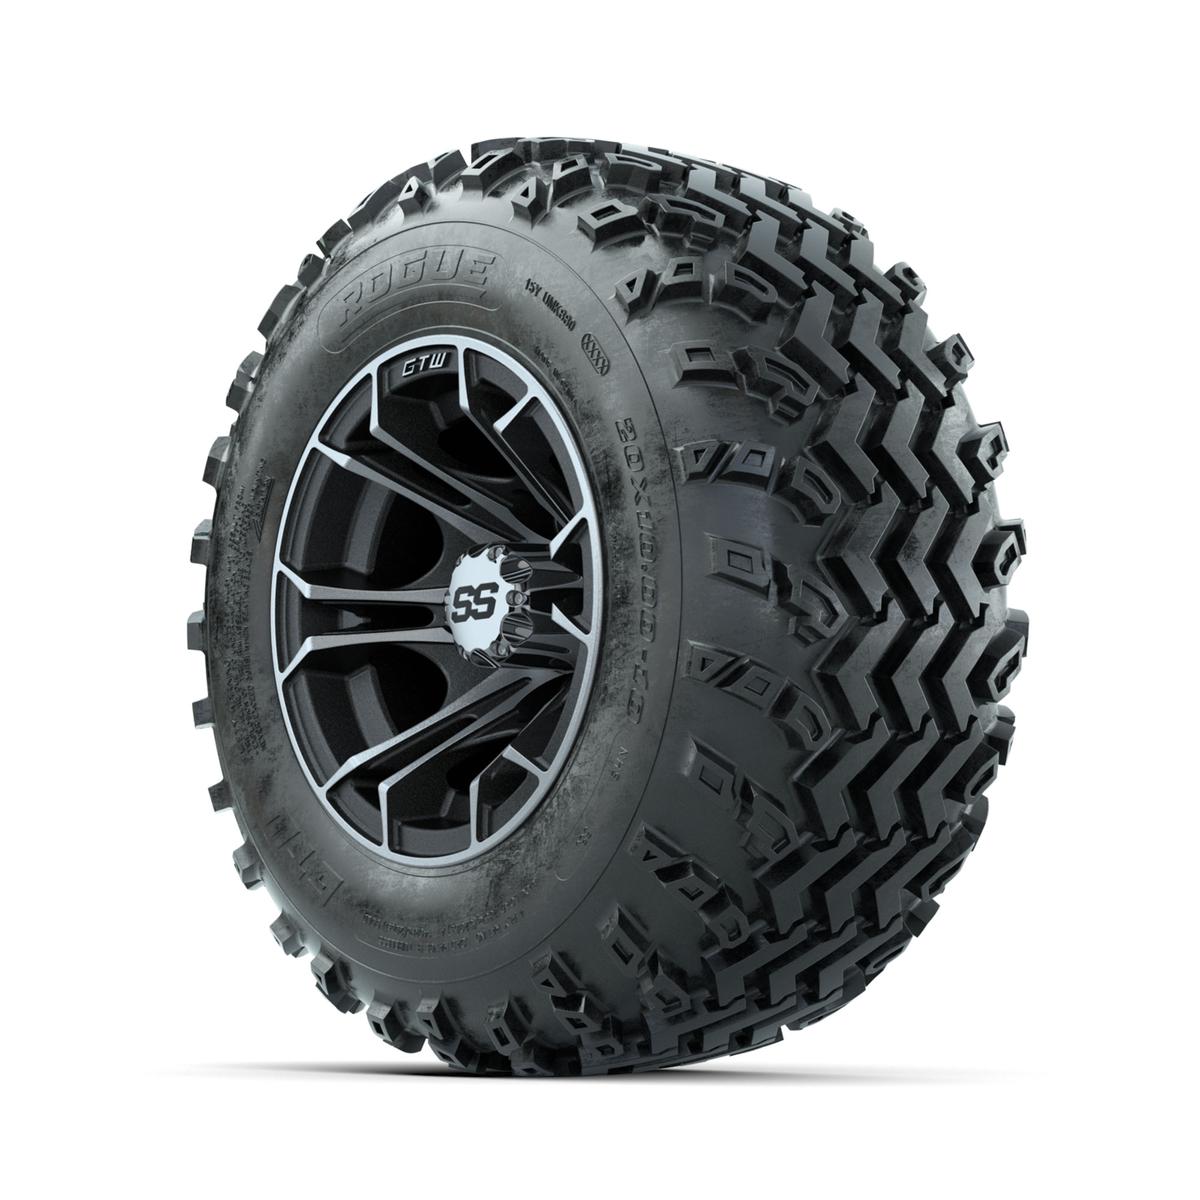 GTW Spyder Machined/Matte Grey 10 in Wheels with 20x10.00-10 Rogue All Terrain Tires – Full Set